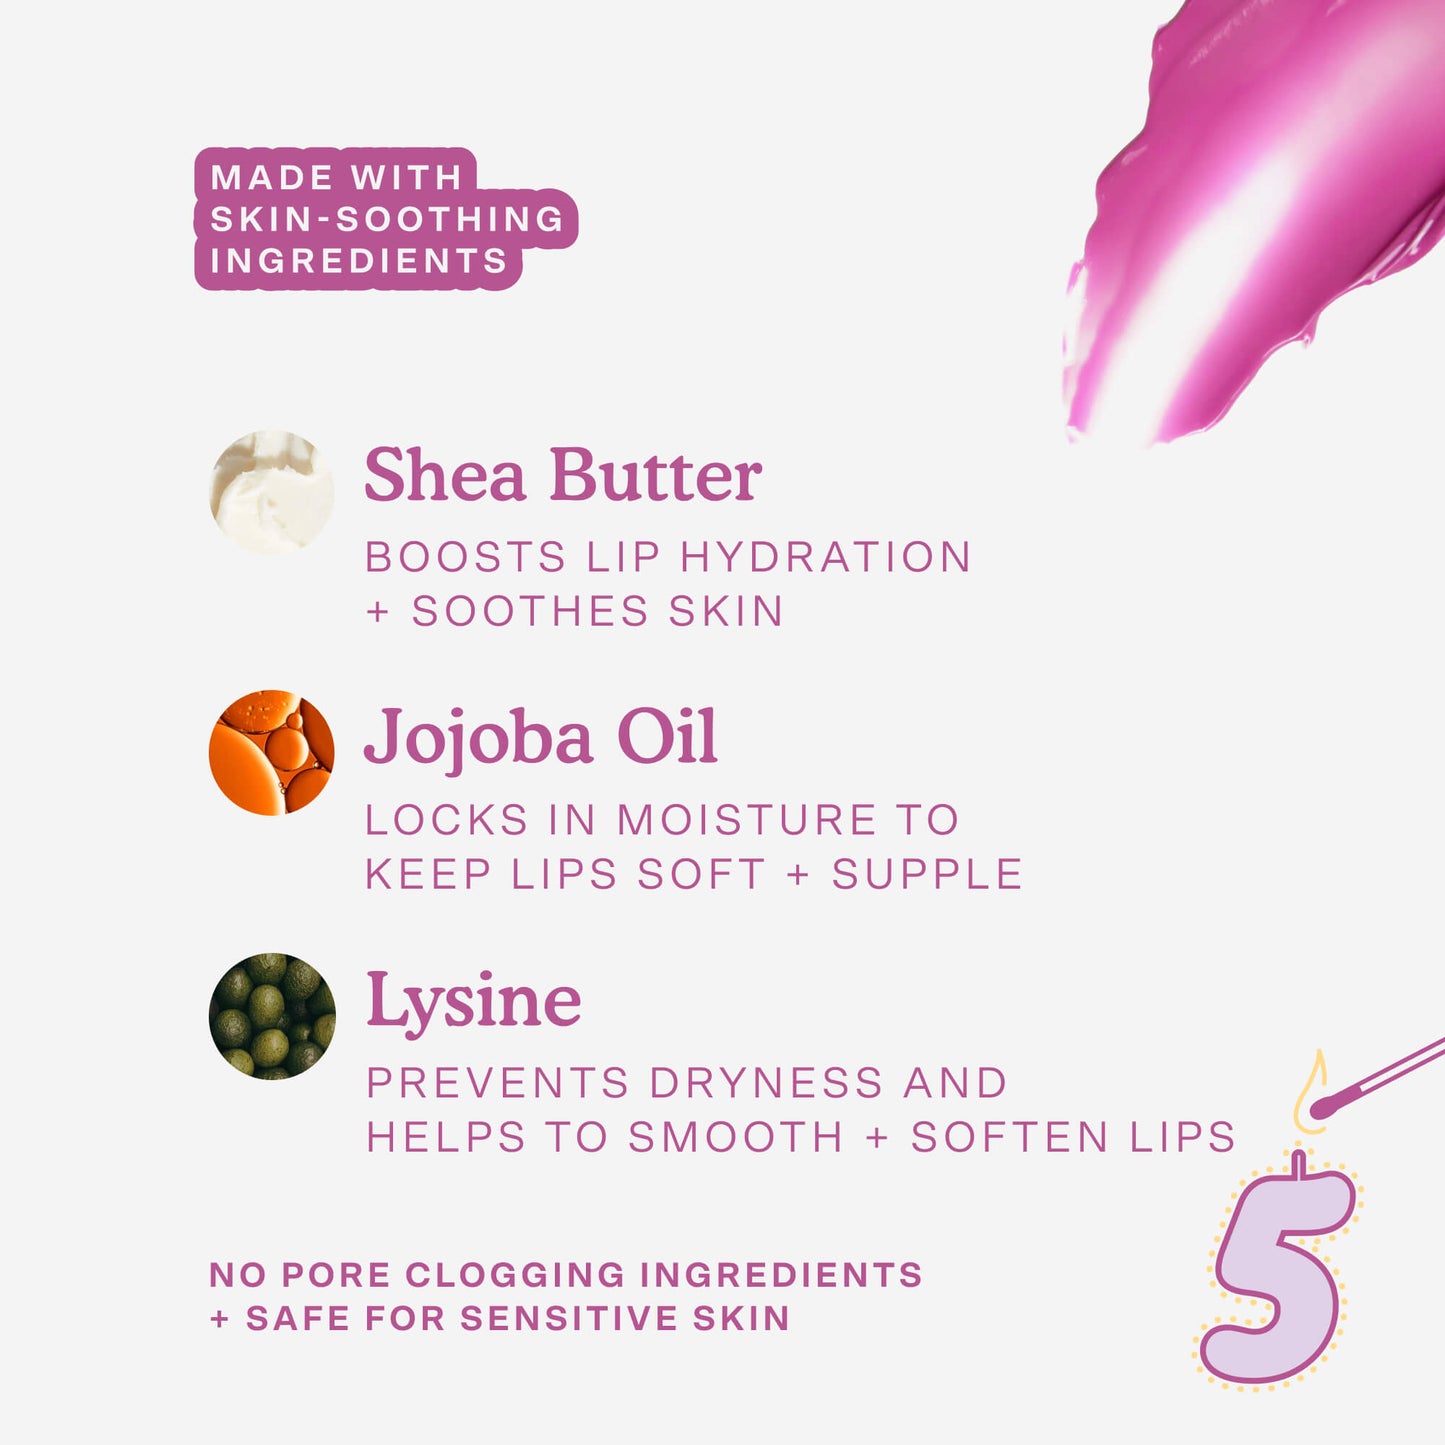 [Shared: The key ingredients of Tower 28 Beauty LipSoftie™ Lip Treatment Confetti Cake listed out]